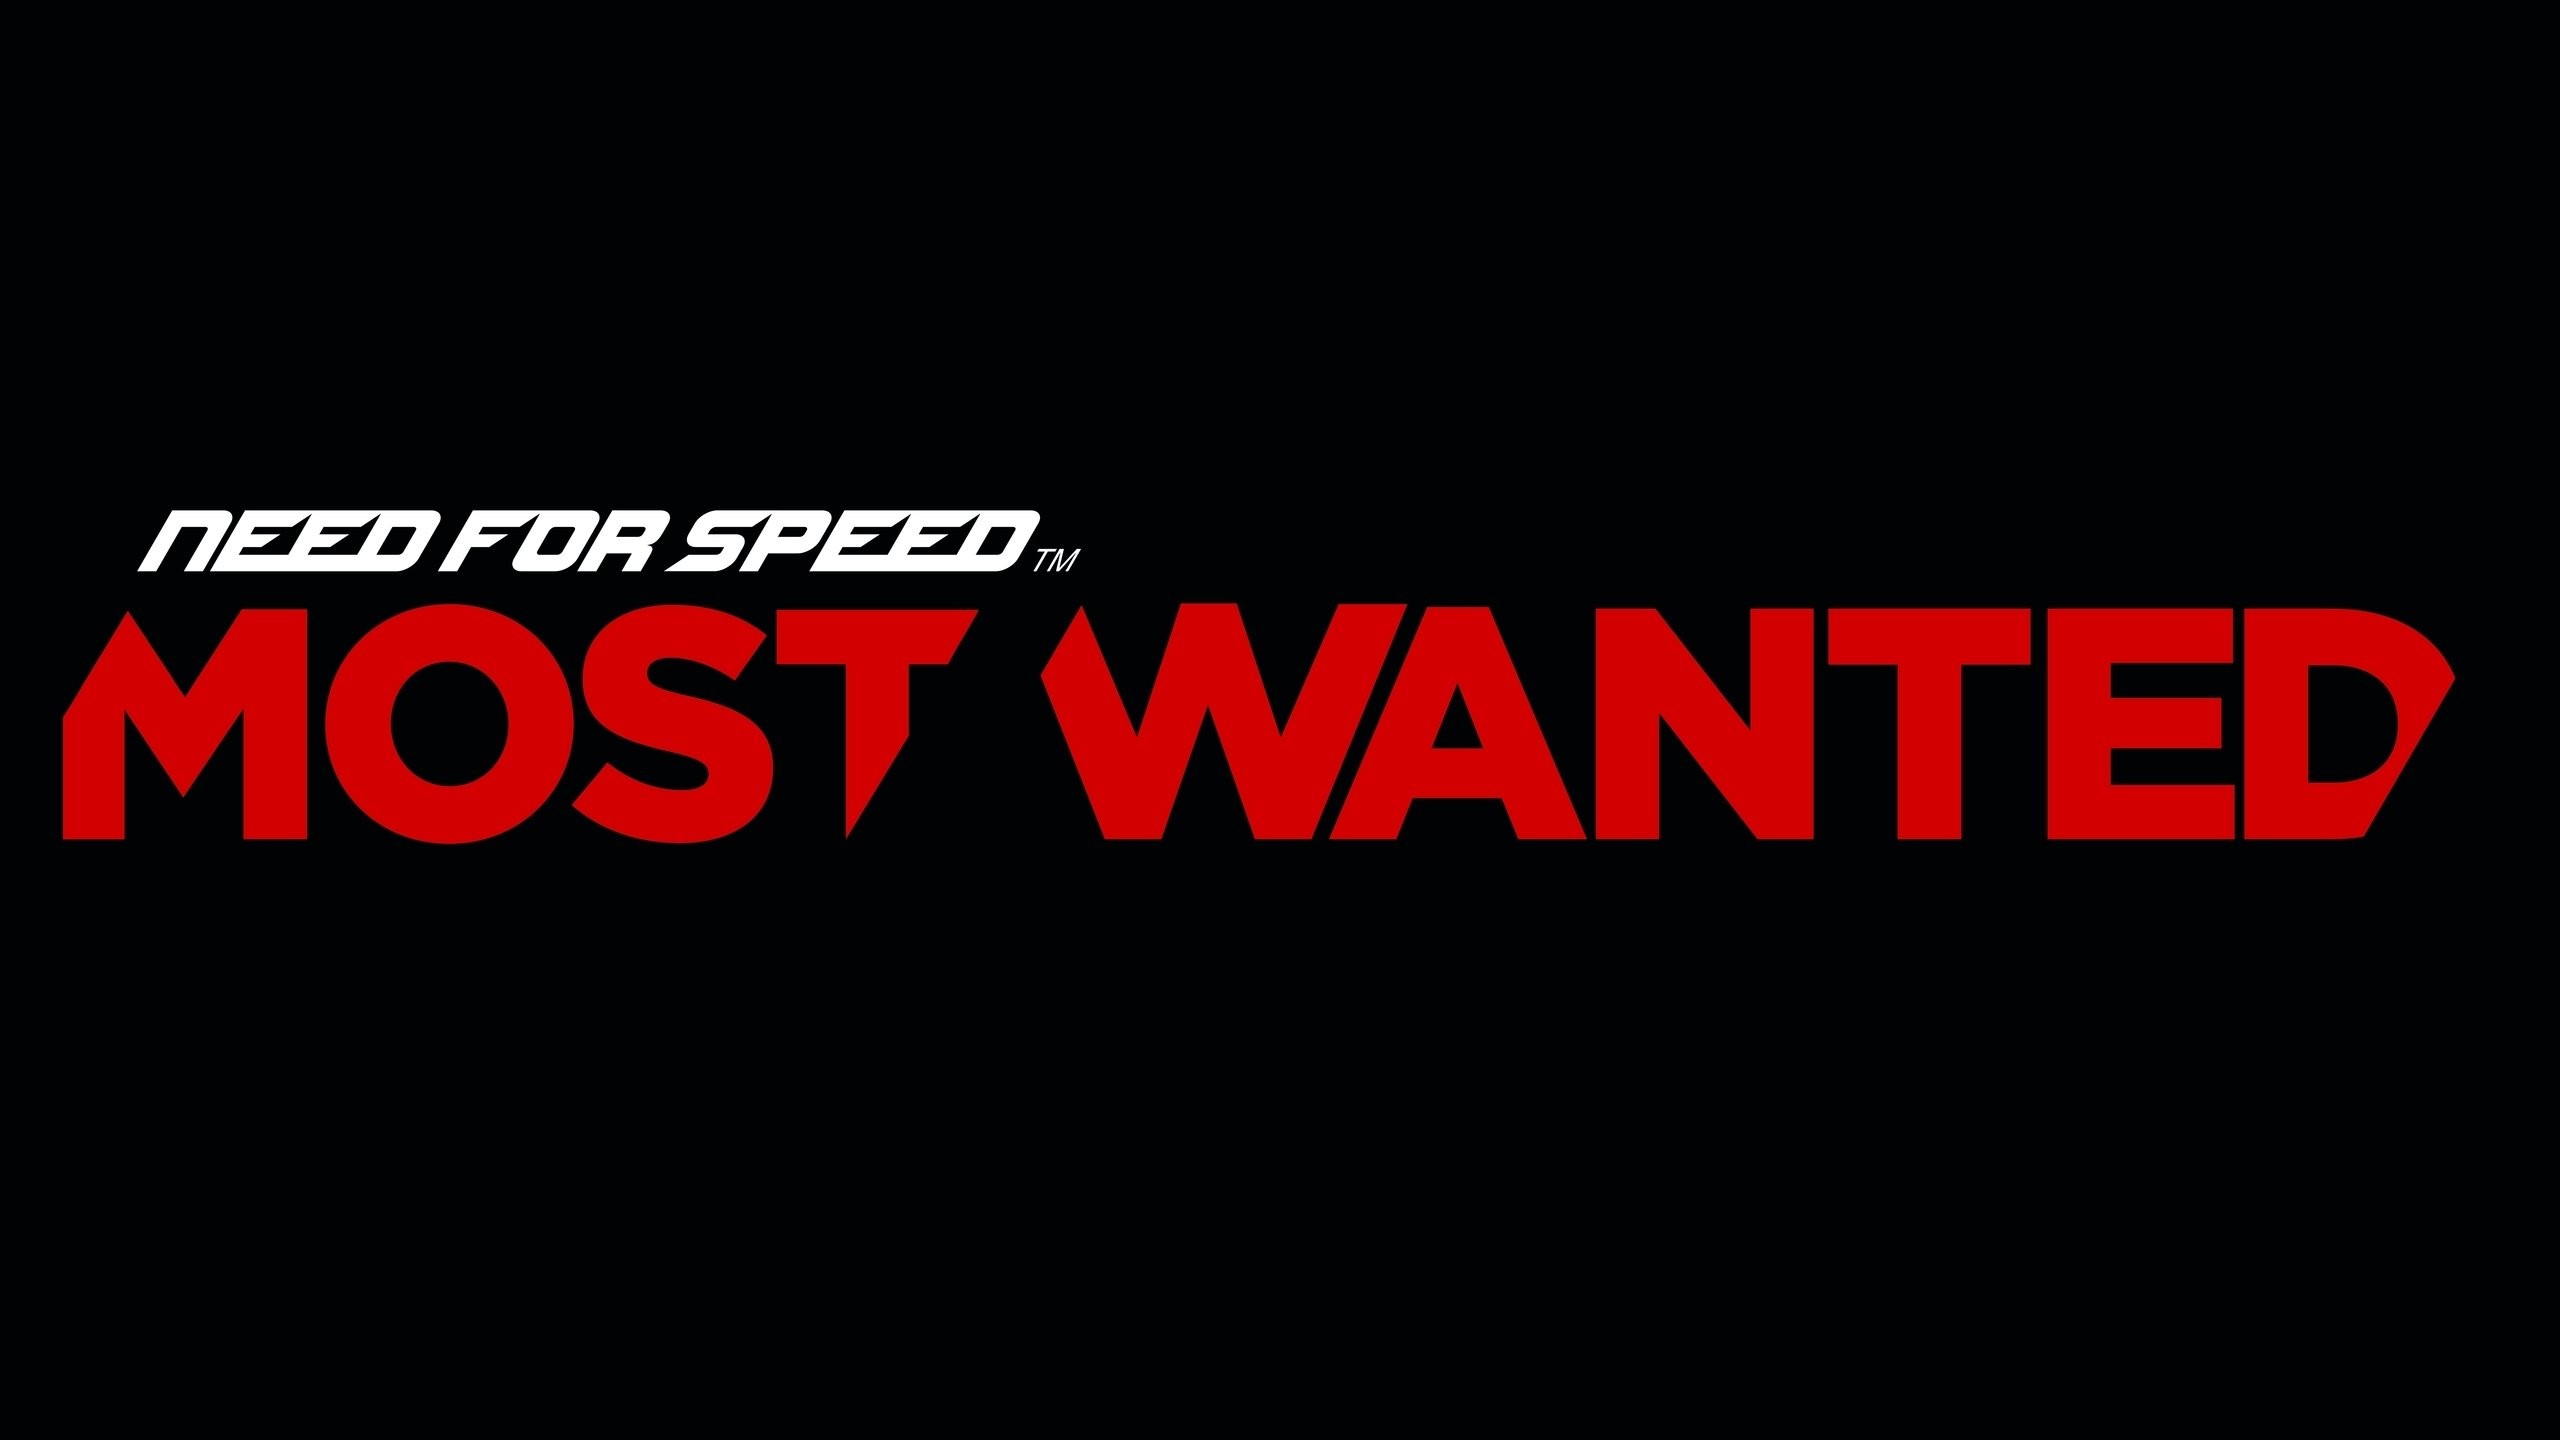 2560x1440 Need For Speed Most Wanted 811548